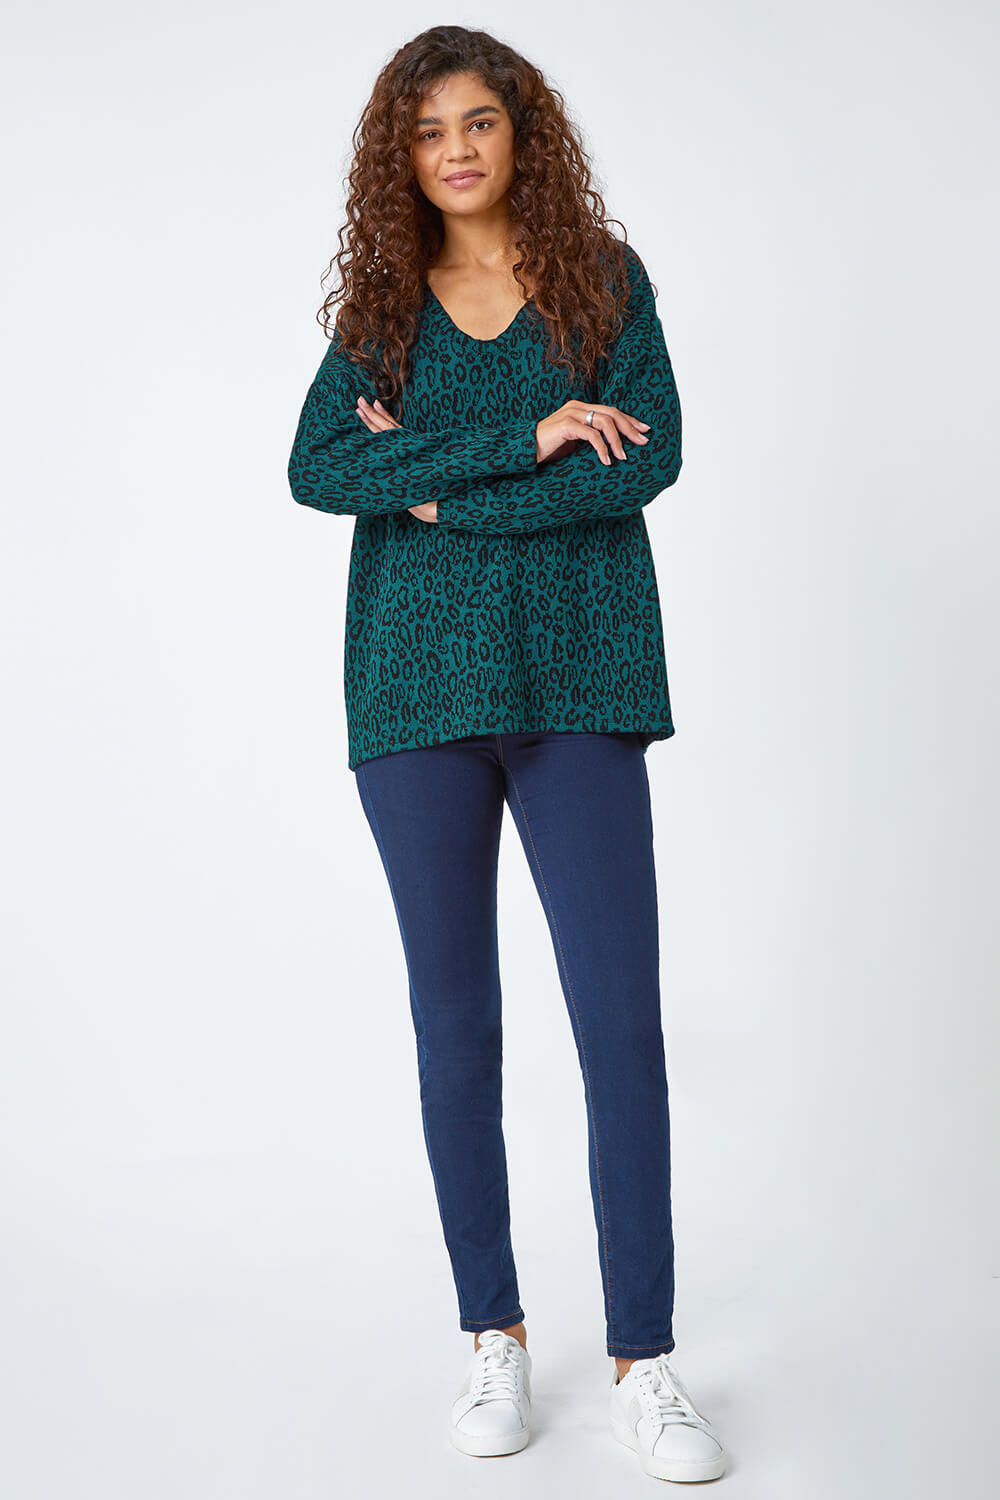 Teal Animal Print Tunic Stretch Top, Image 4 of 5